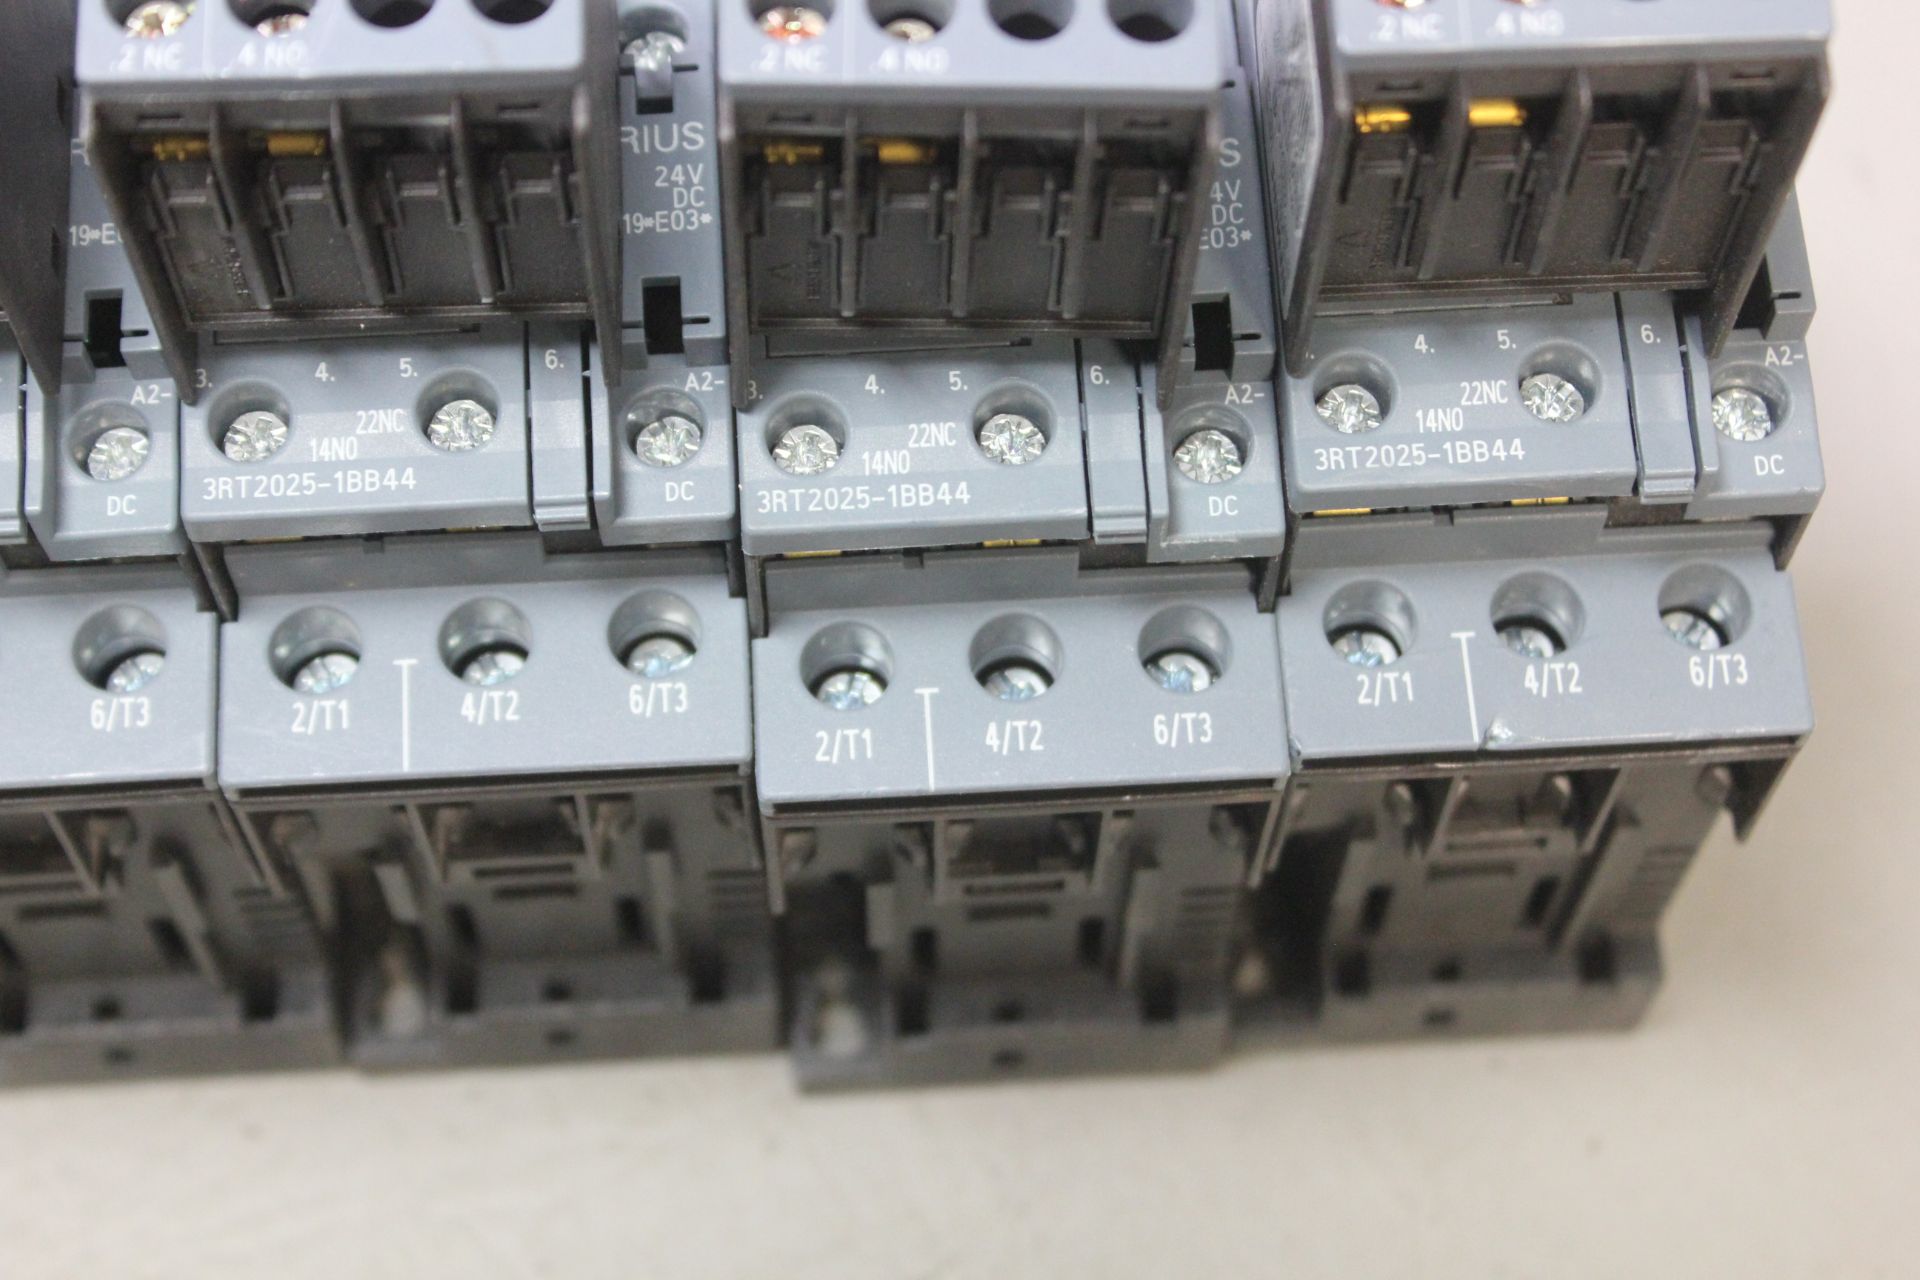 LOT OF 6 SIEMENS CONTACTORS WITH AUX SWITCHES - Image 4 of 4